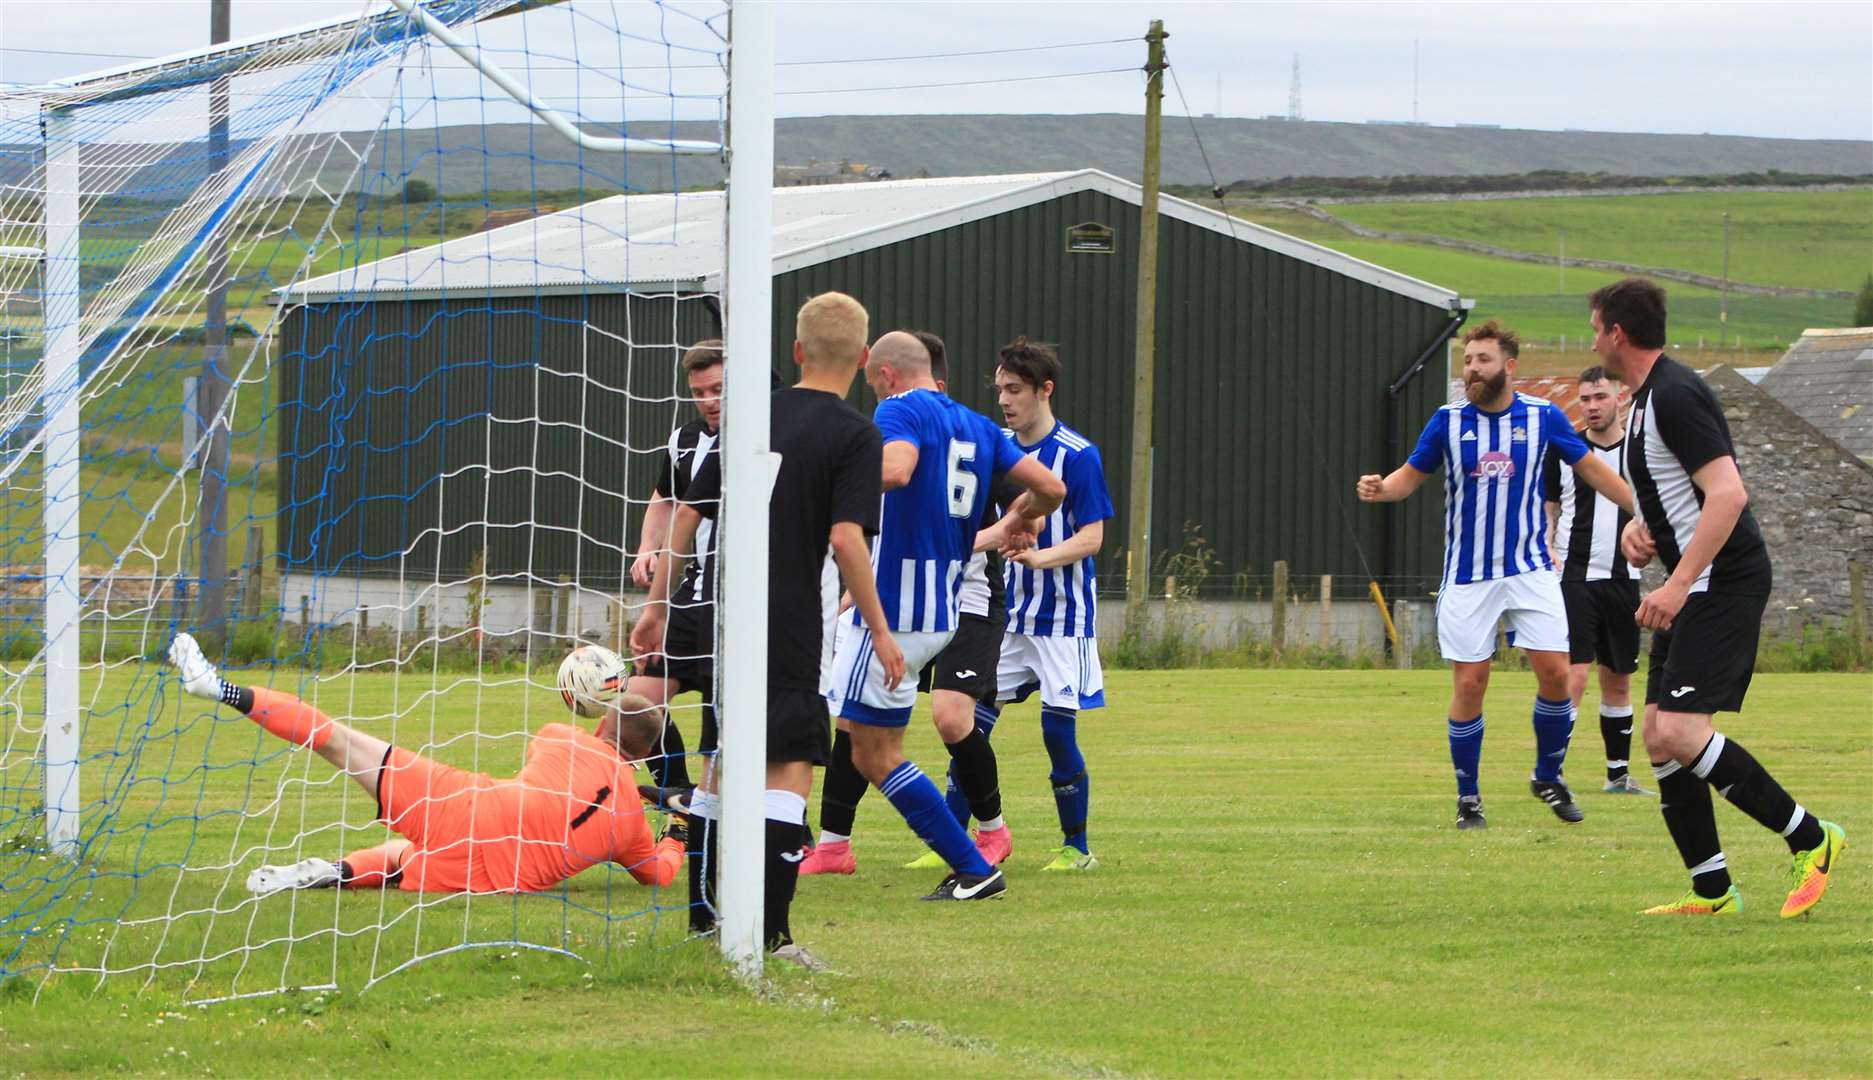 A scramble in Swifts' penalty box as Lybster try to find a way through during the first half of Tuesday's David Allan Shield match.